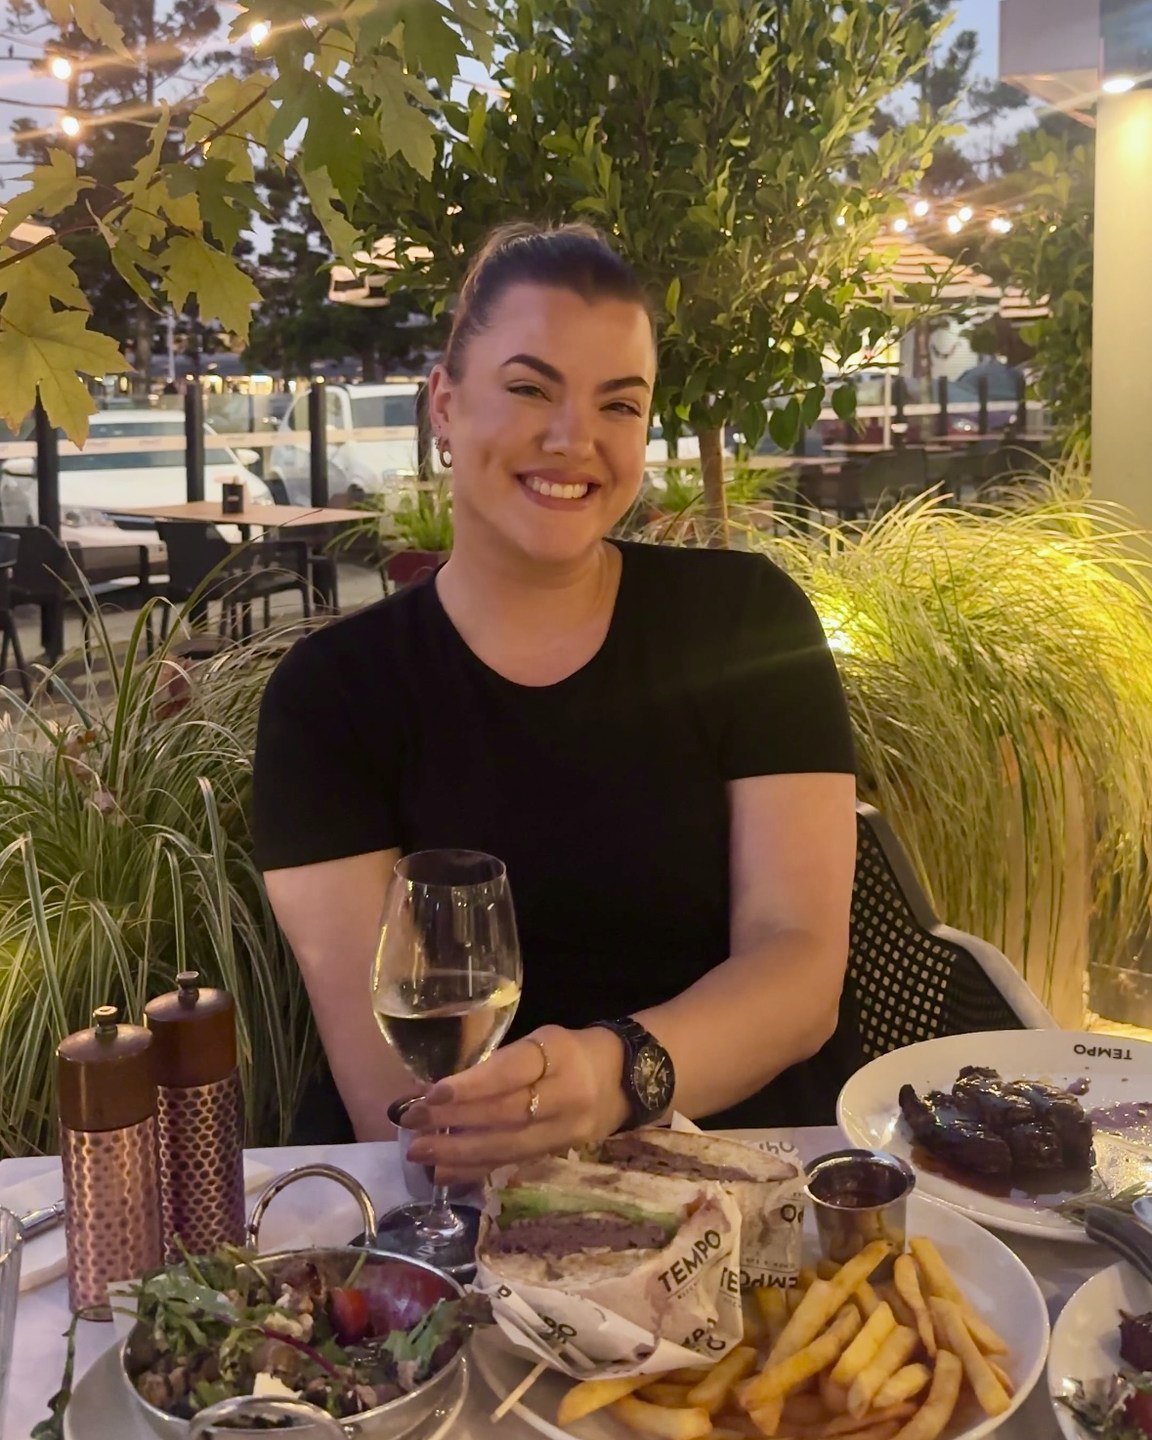 @chelslovesit soaking up the waterfront views and dinner delights at Tempo! 

Thank you for coming by, we hope to see you again soon!

To view the menu visit the link in bio.
_____

Open daily for breakfast, lunch &amp; dinner.
Opening hours on websi